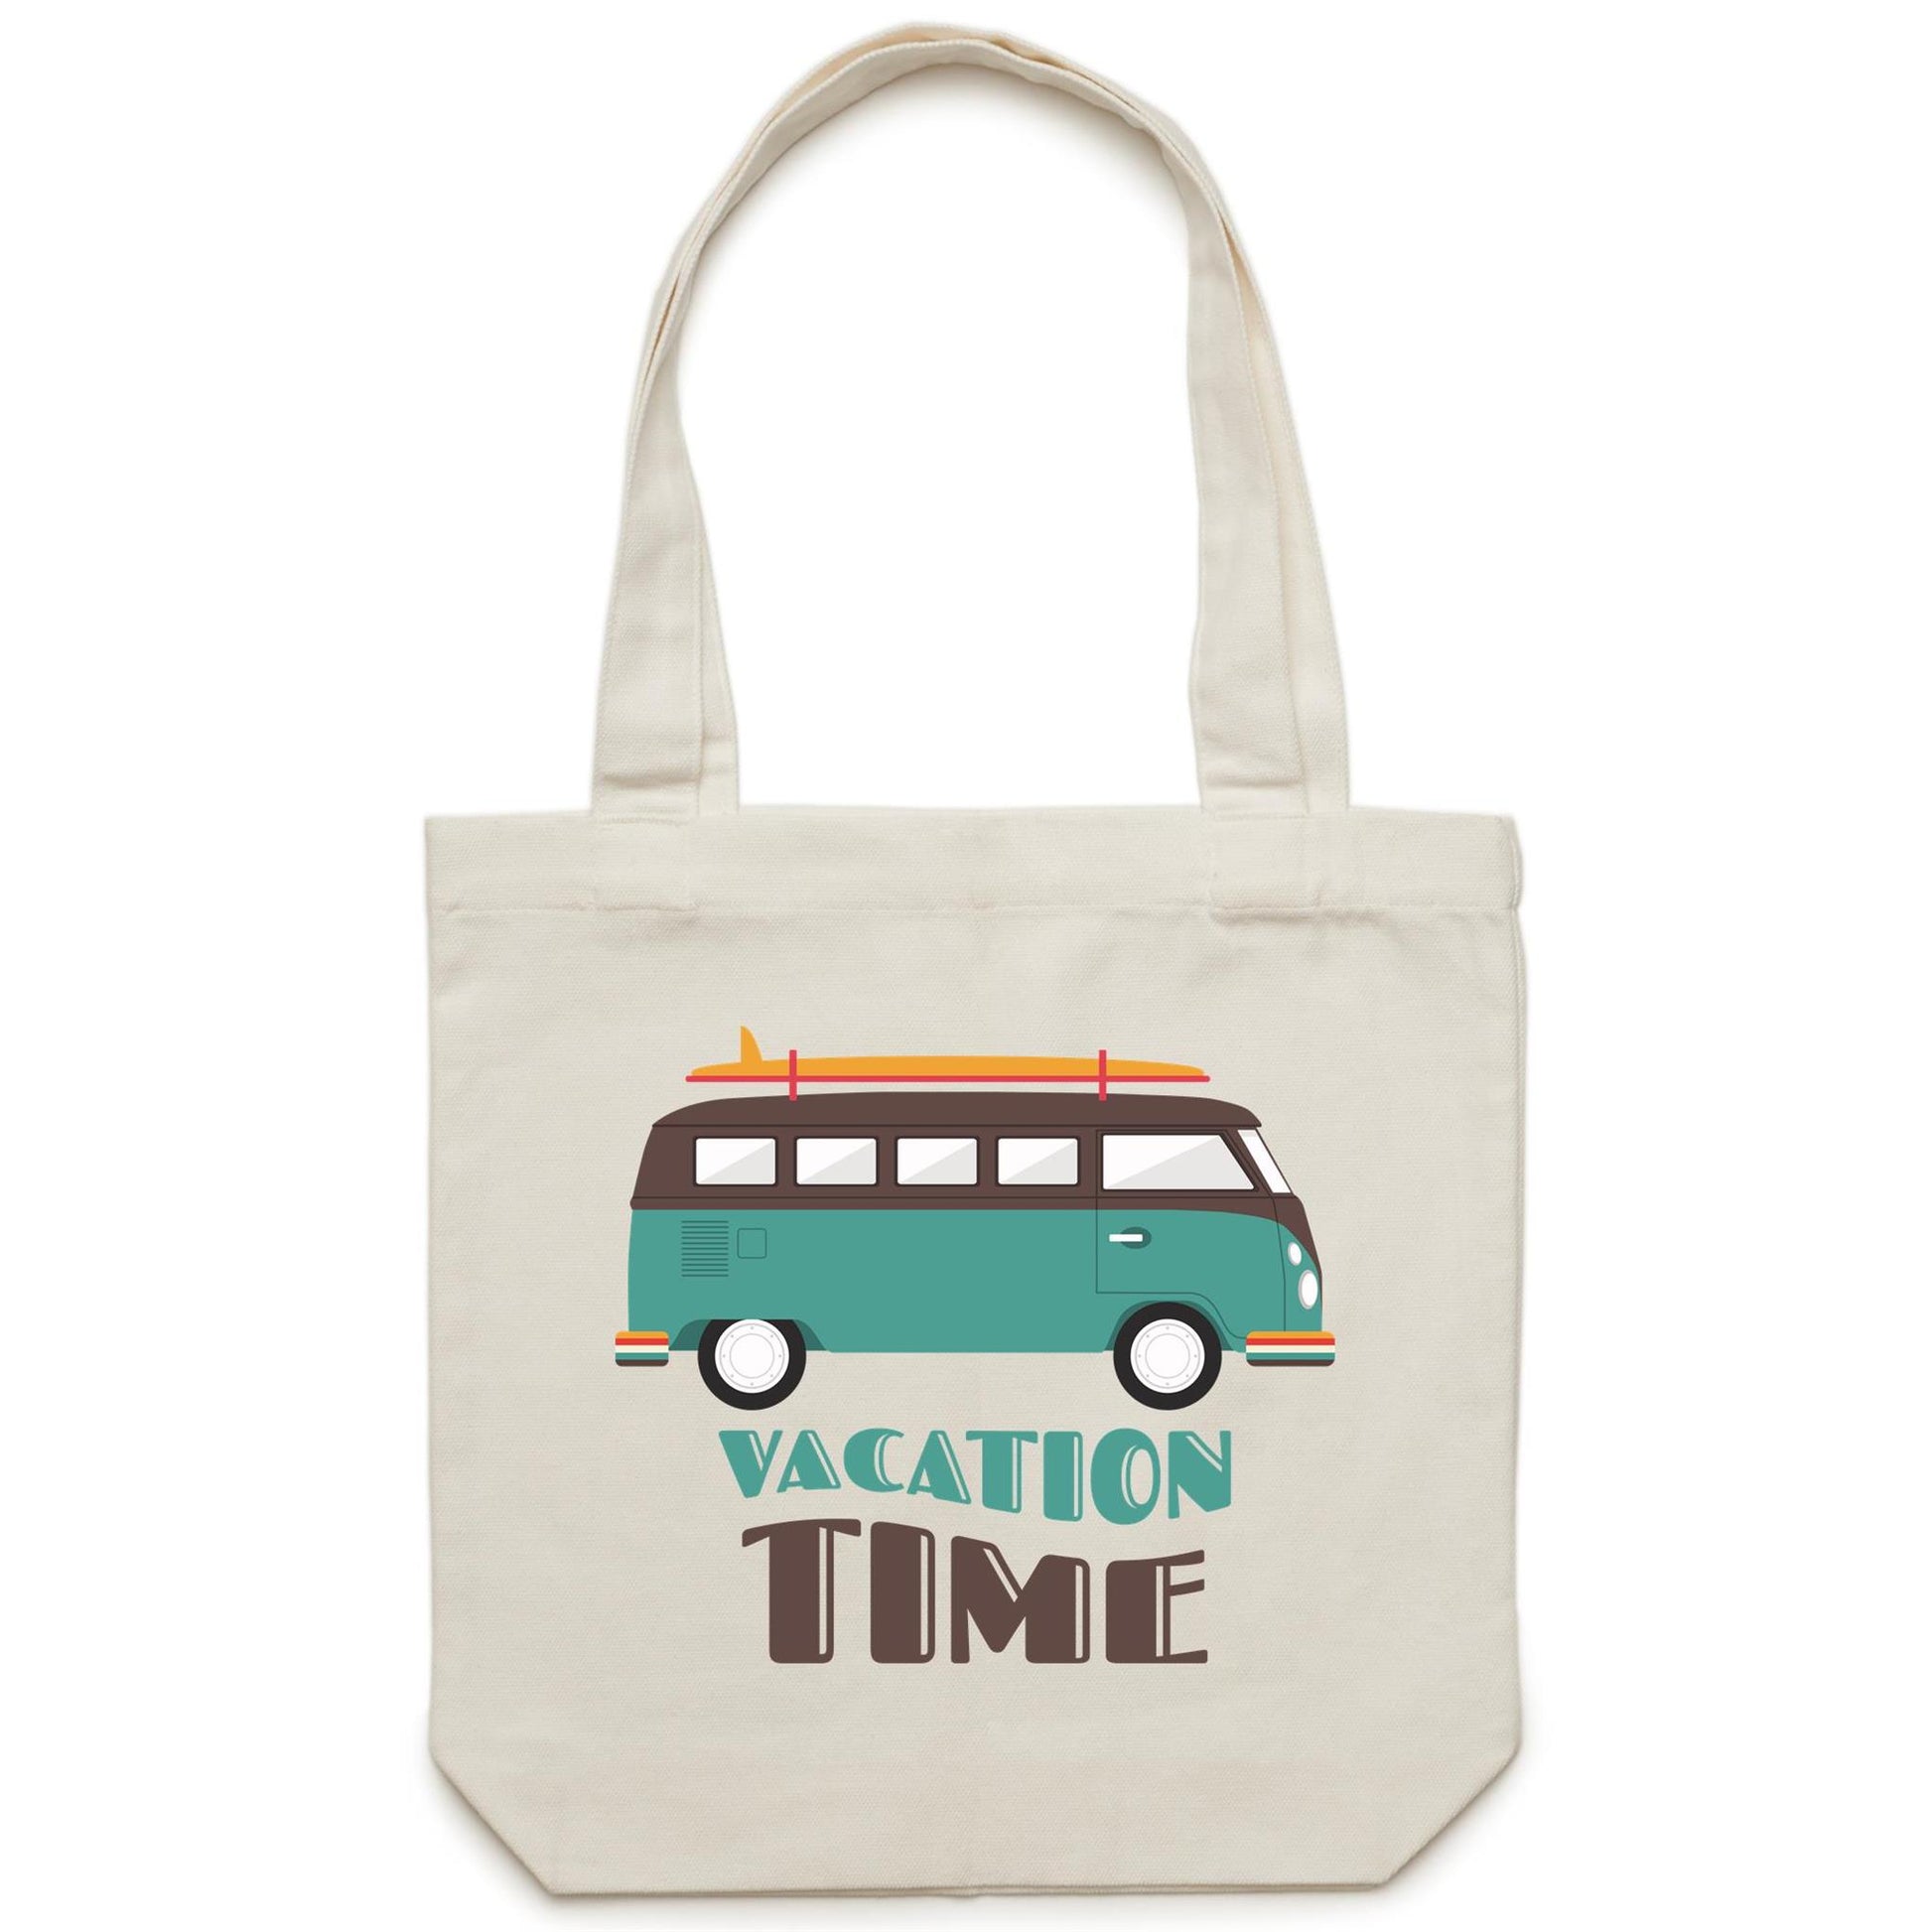 Vacation Time - Canvas Tote Bag Cream One-Size Tote Bag Summer